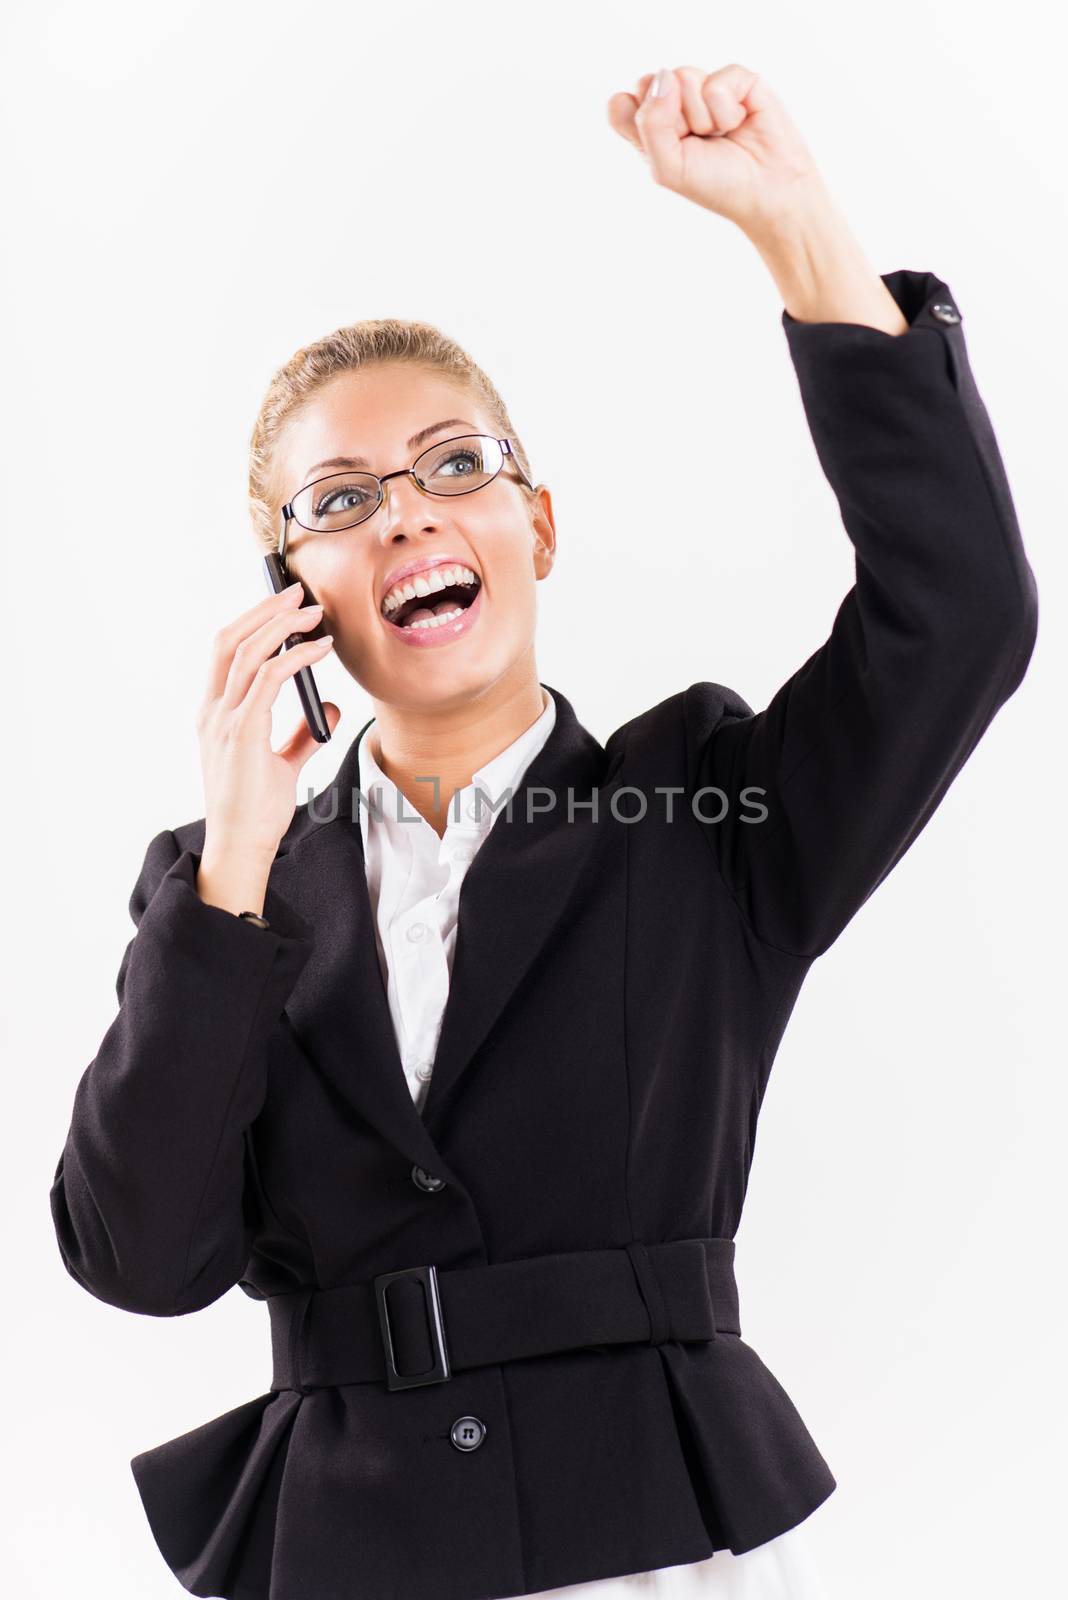 Portrait of attractive successful businesswoman using a mobile phone. She is happy.